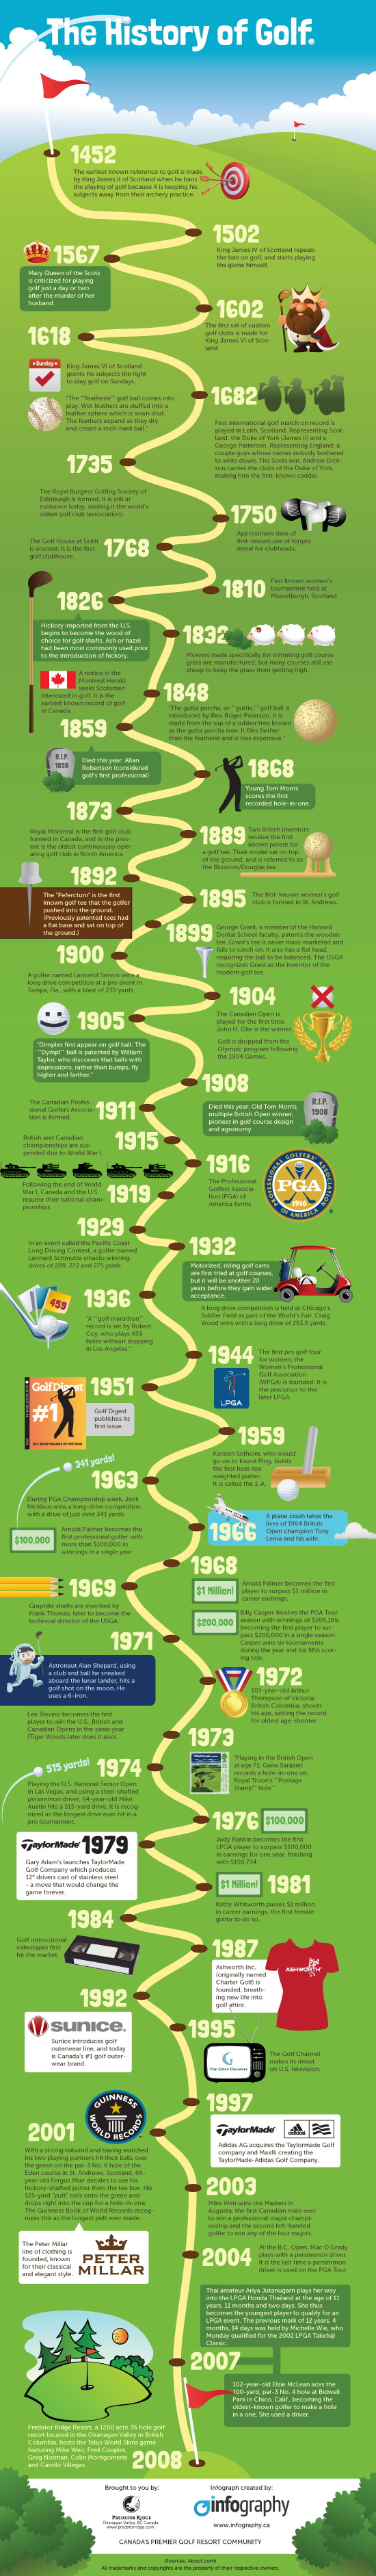 History of Golf Infographic